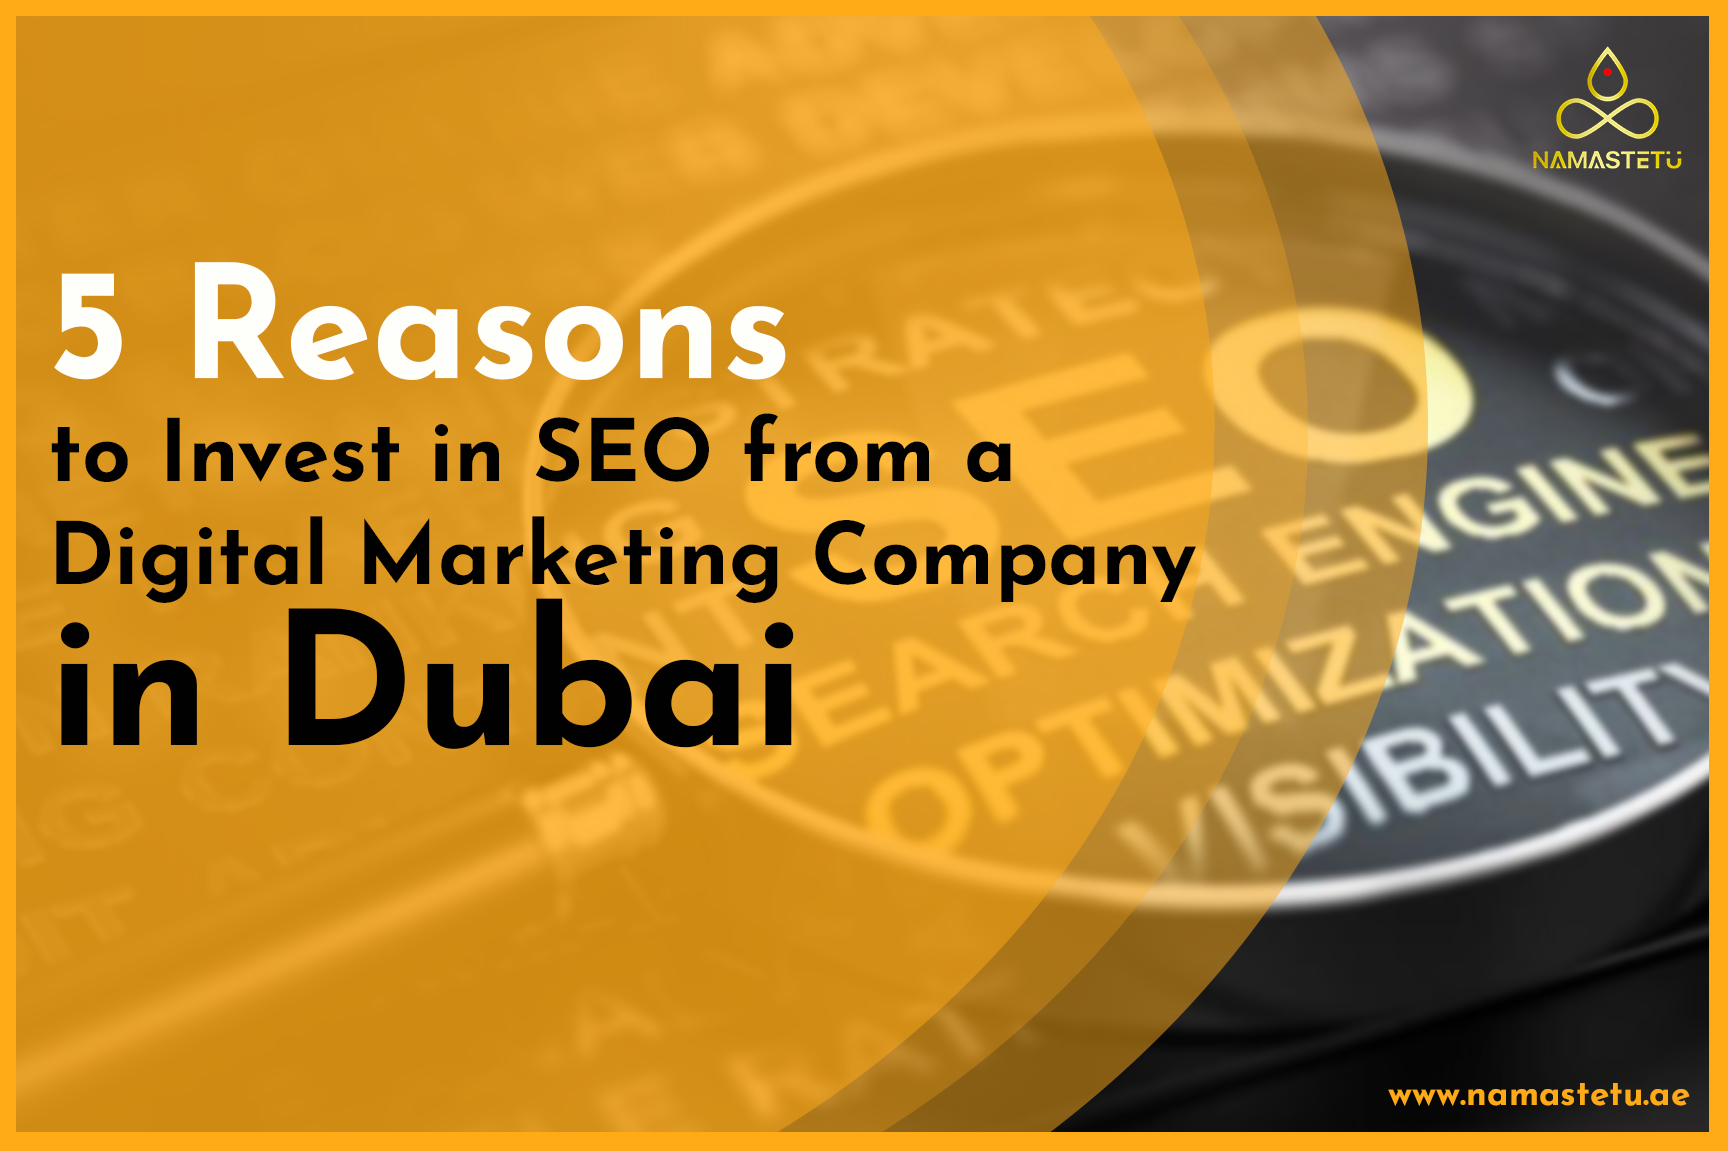 Show result on SERP when searching for 5 Reasons to Invest in SEO from a Digital Marketing Company in Dubai